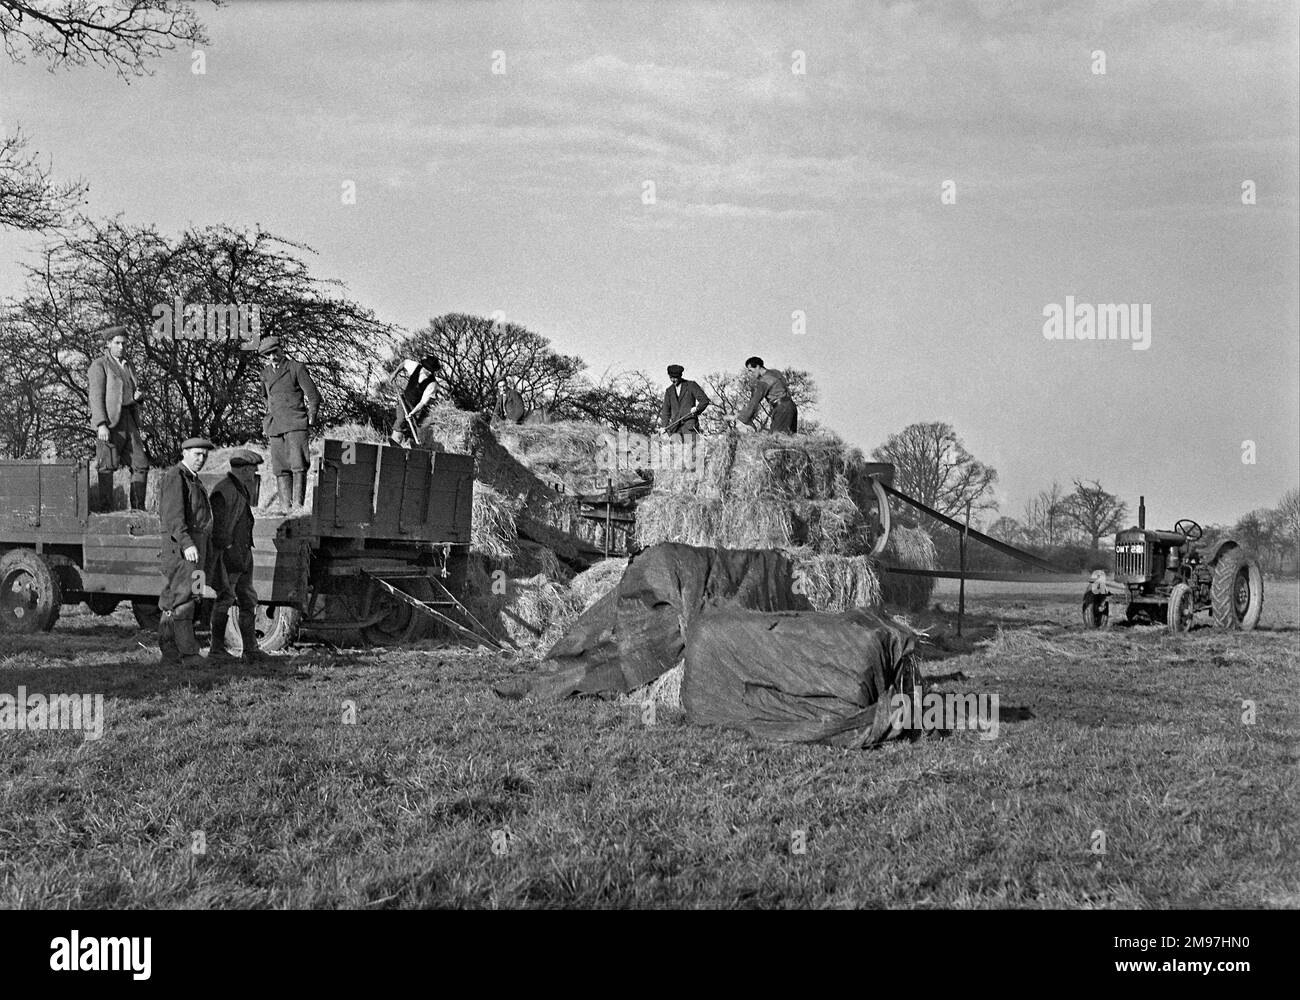 People haymaking in a field. Stock Photo